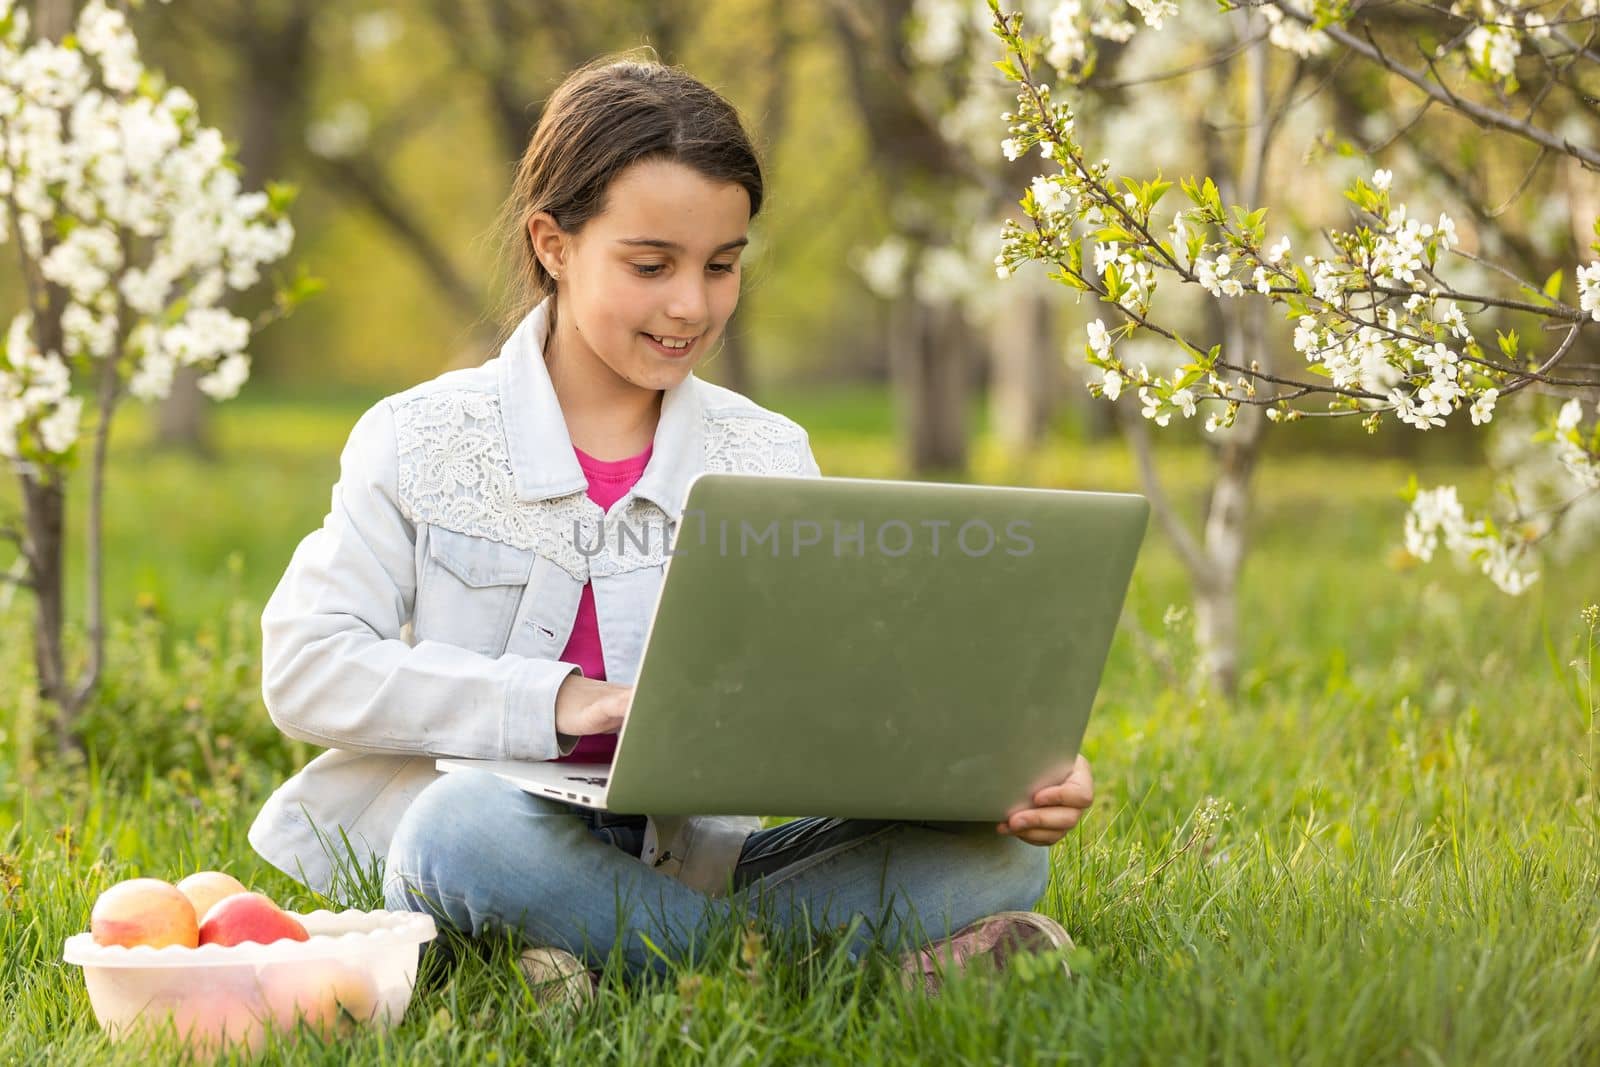 Little girl using laptop computer in a backyard. Child studying at home doing her homework or having online lesson. Homeschooling concept